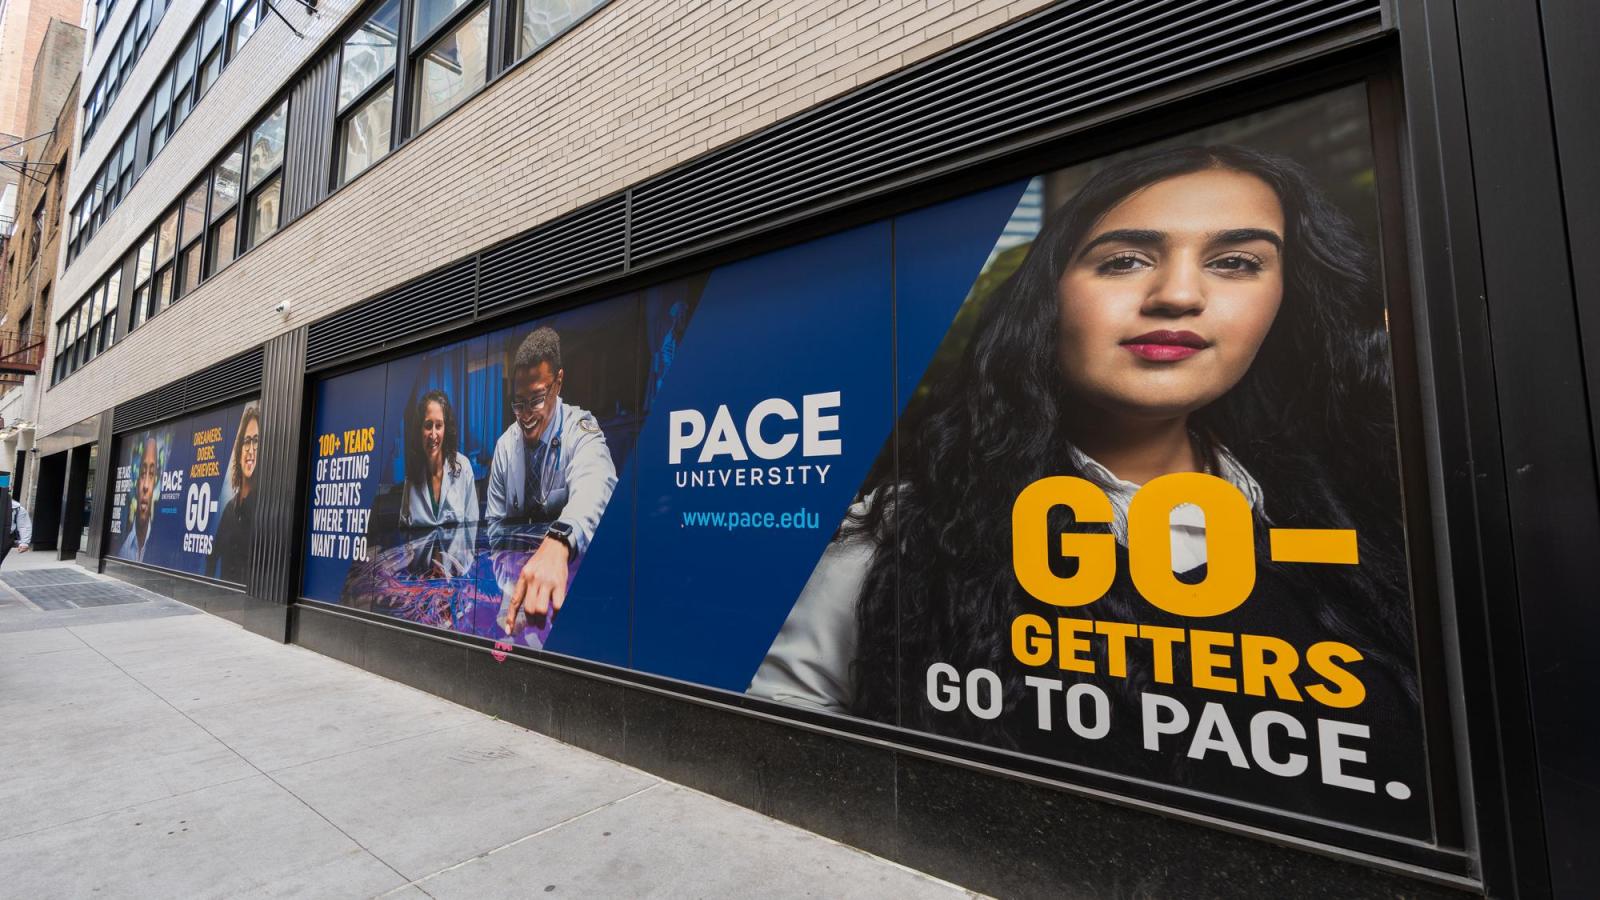 Pace University advertisements on the side of a building in New York City